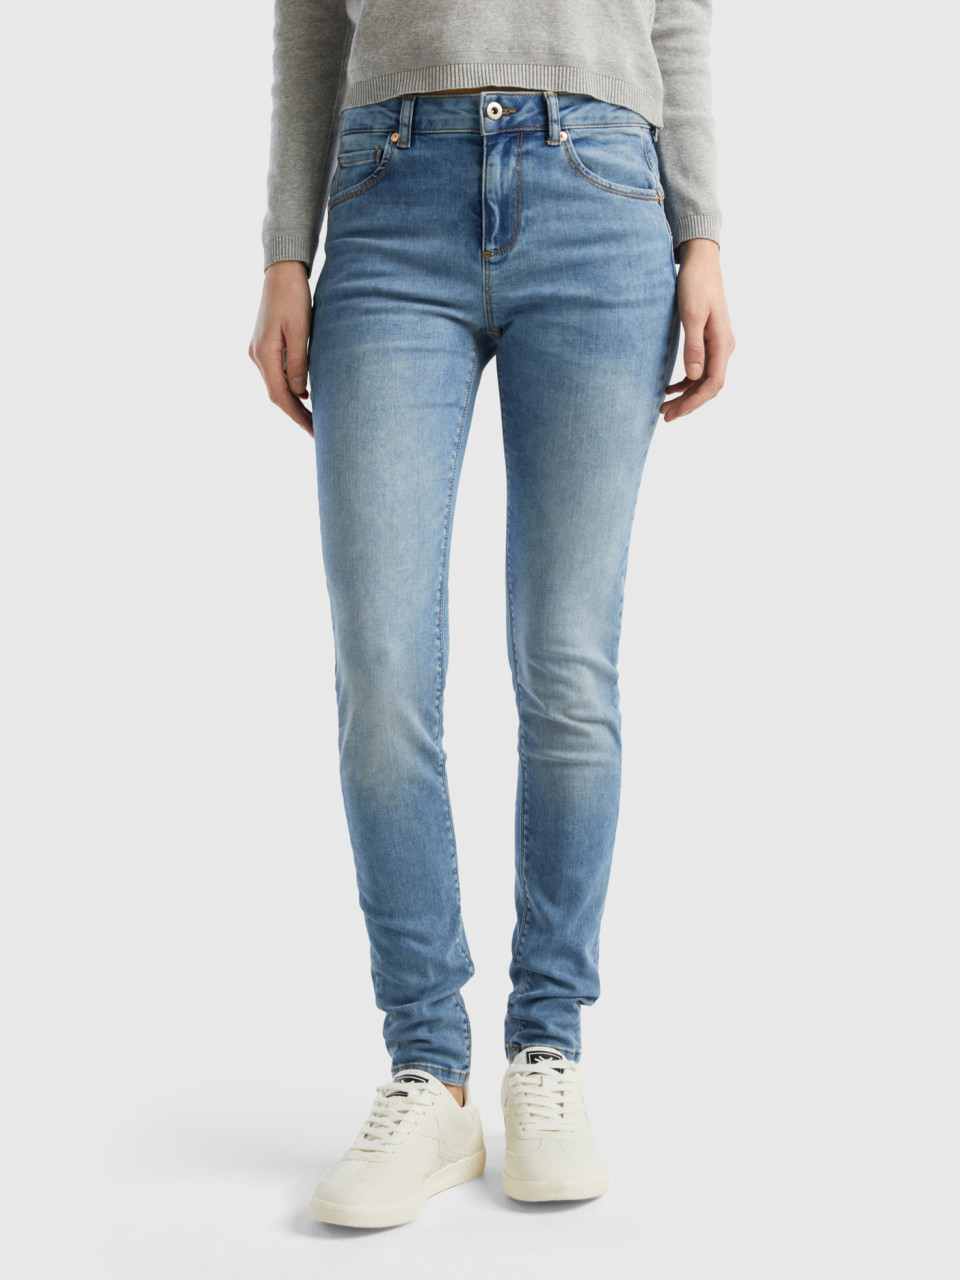 Benetton, Jeans Push Up Skinny Fit, Azzurro, Donna